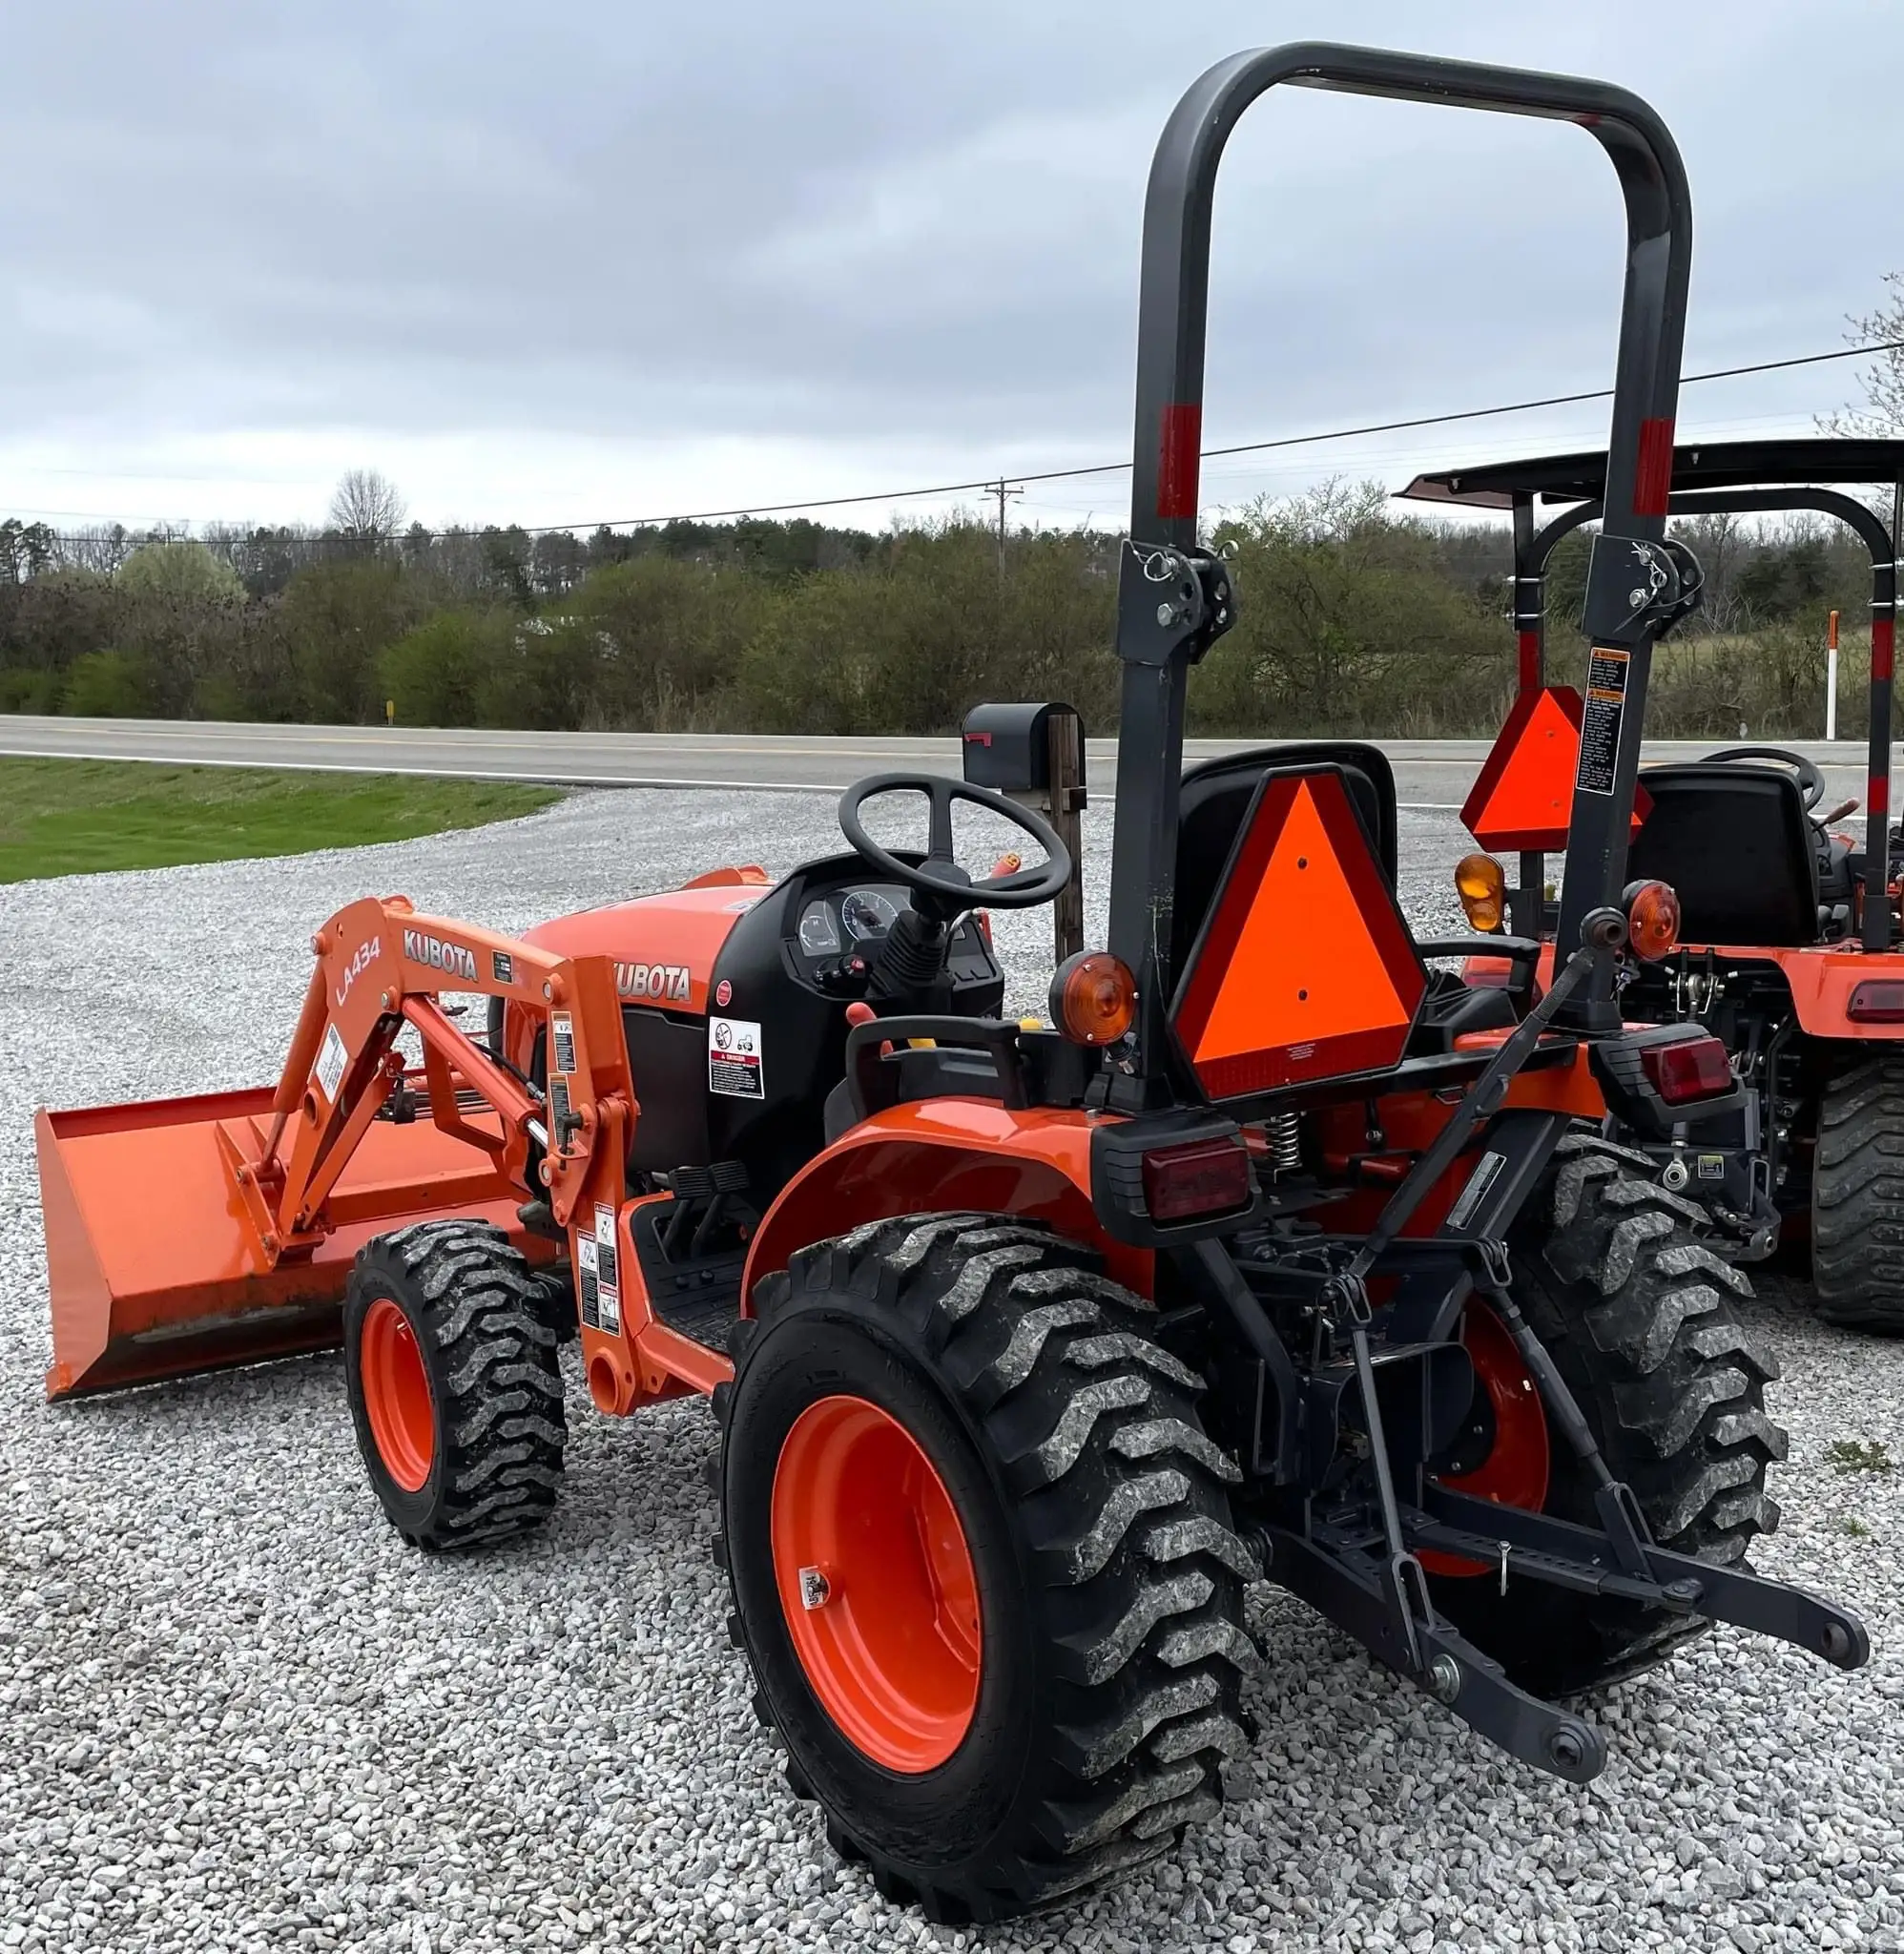 2021 Used 22hp Kubota B2301 Tractor Model In Stock Ready For Shipment